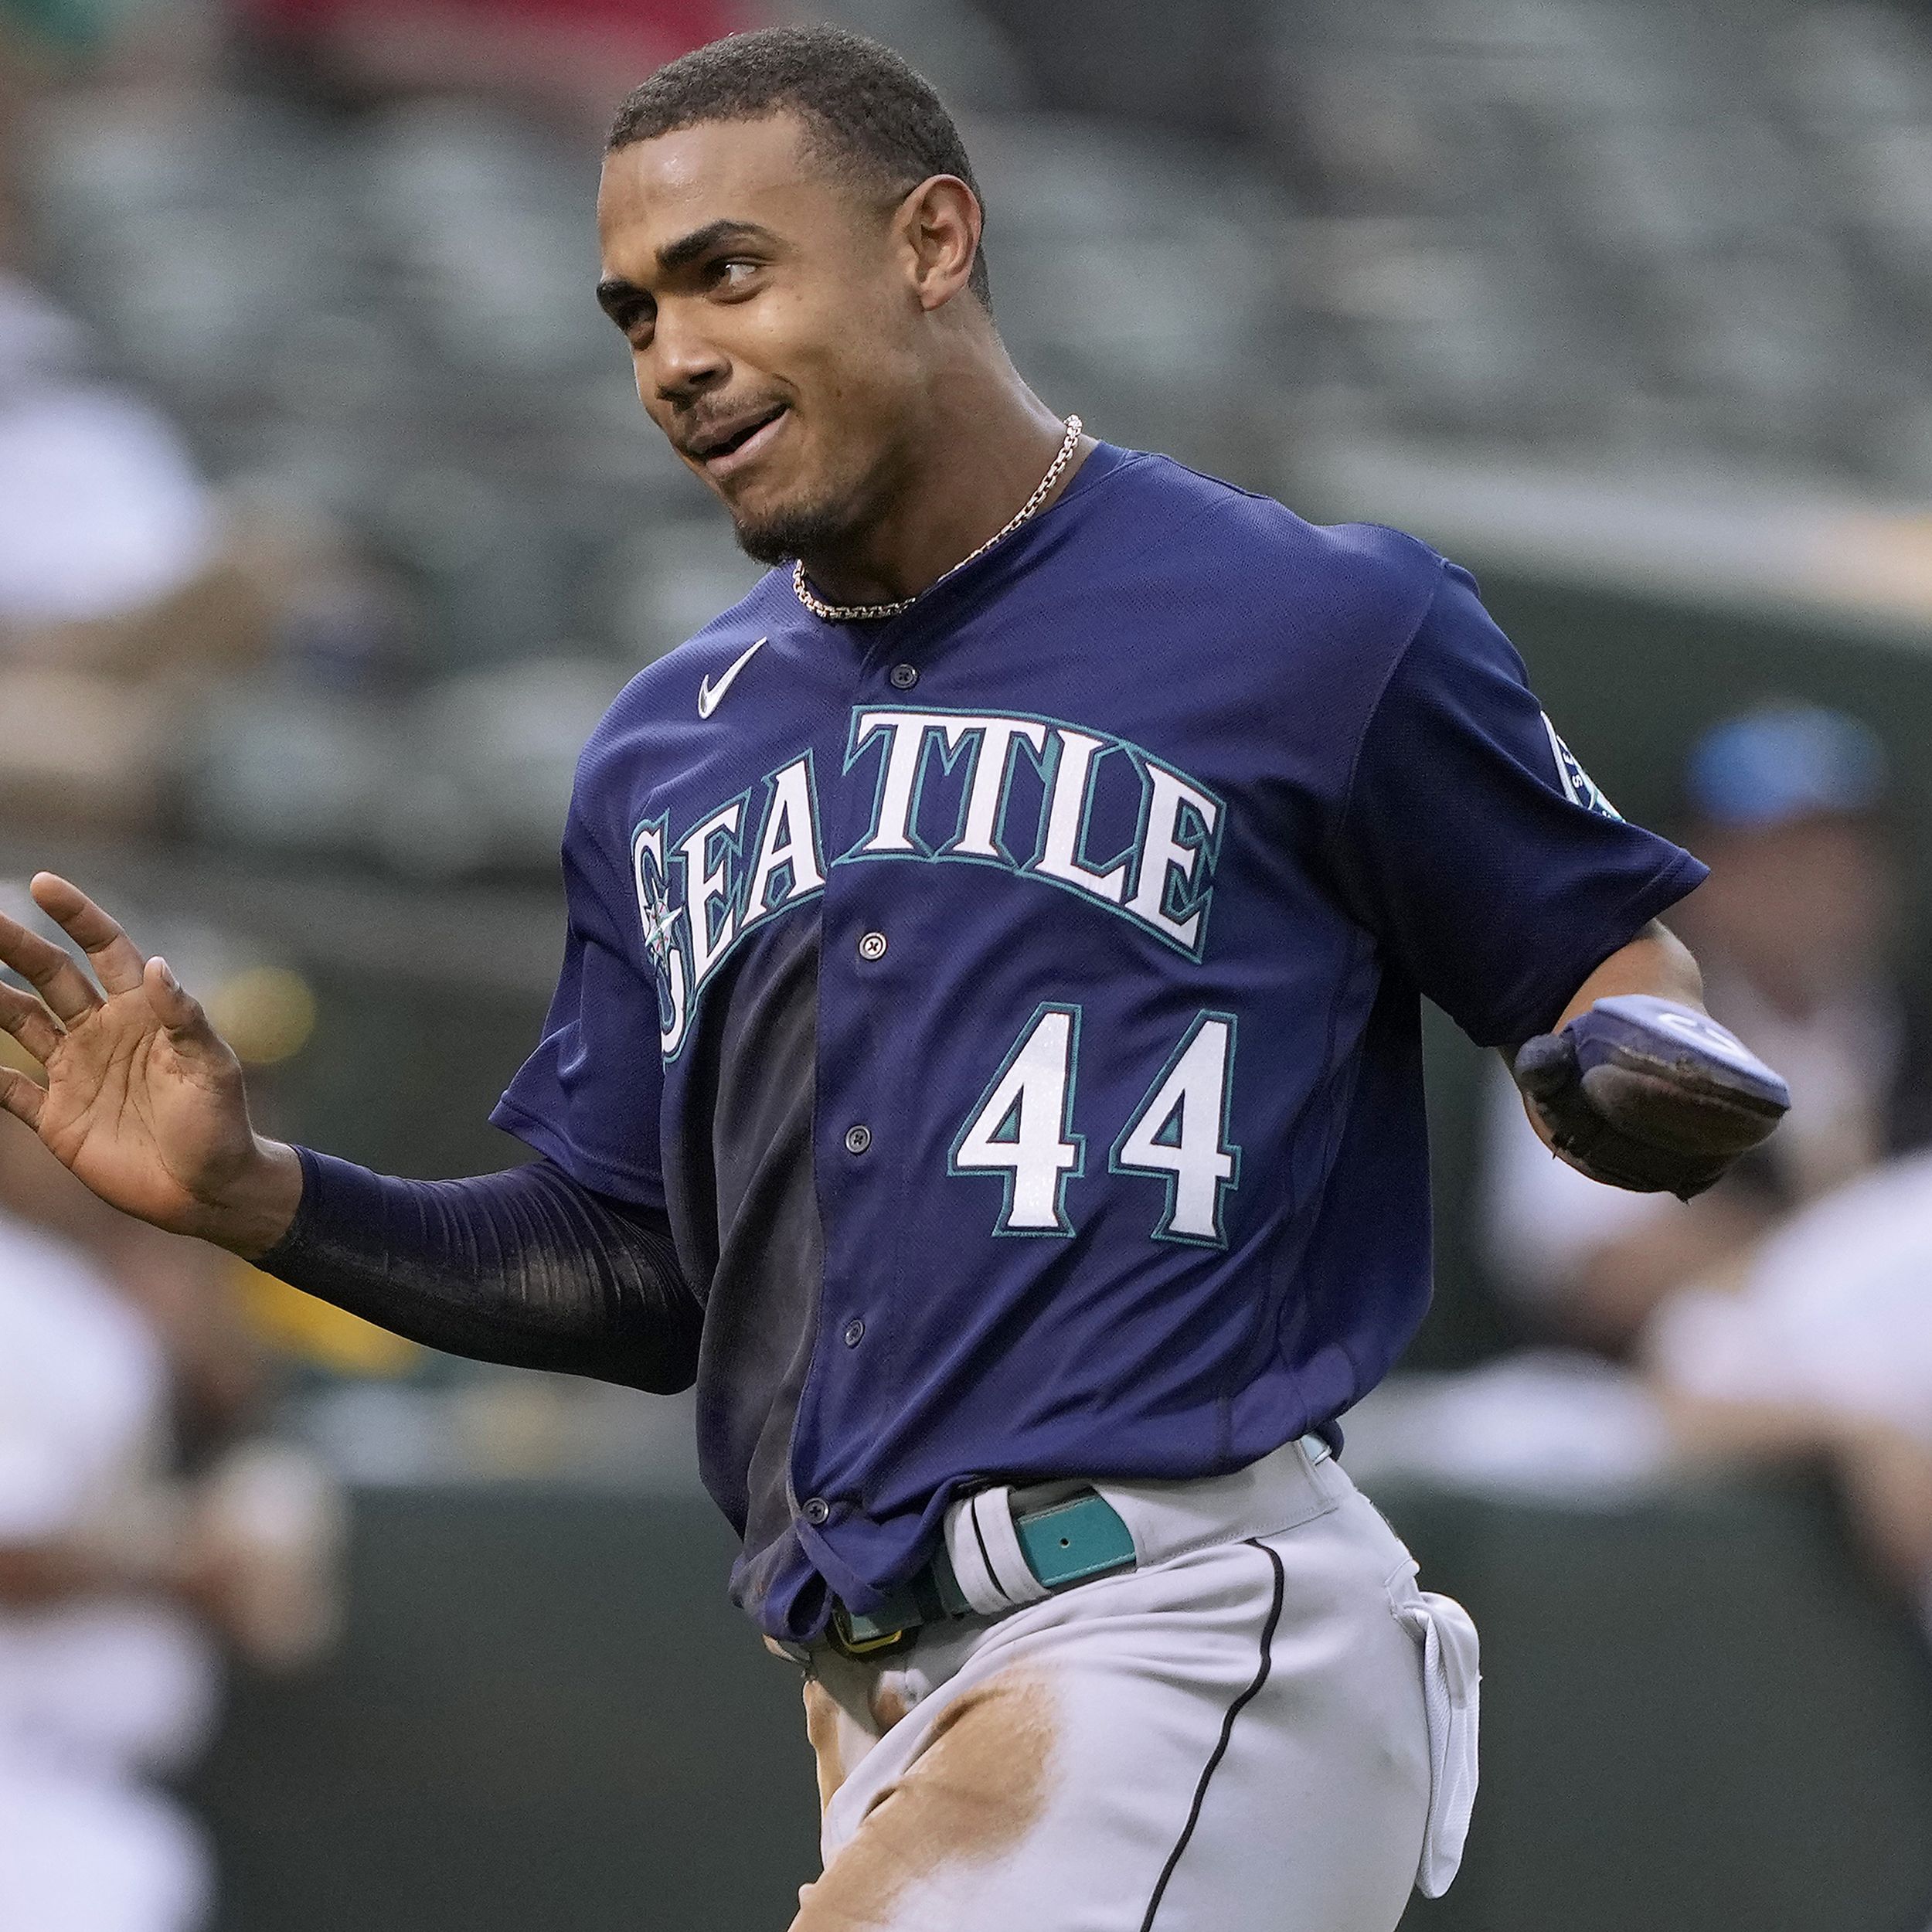 Olympic bronze medalist Julio Rodriguez earns MLB Rookie of the